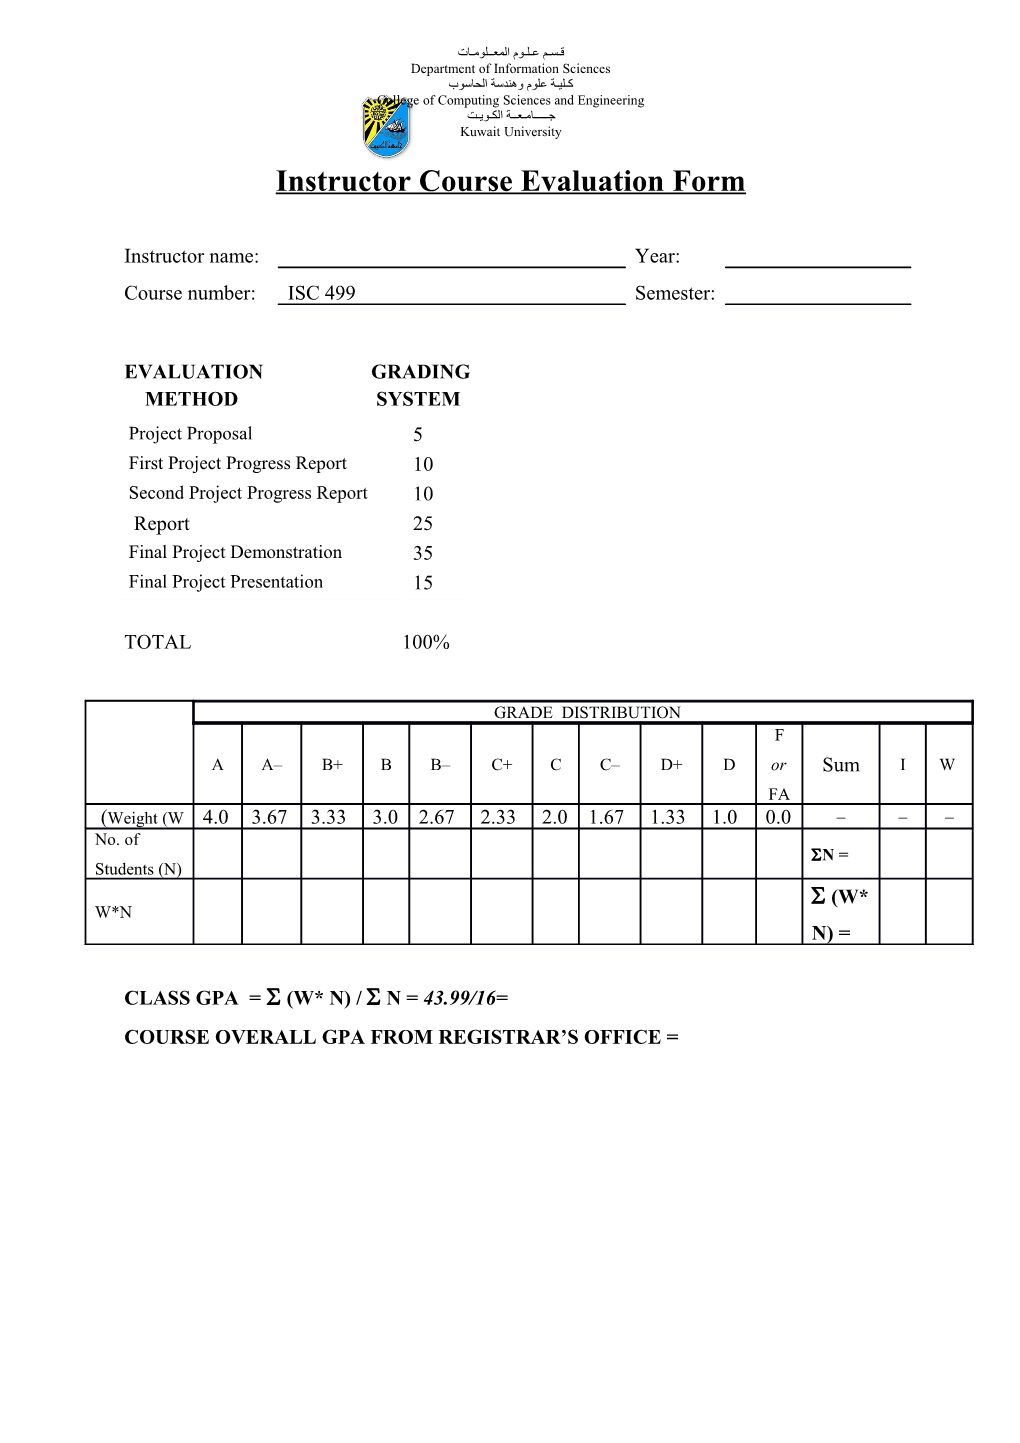 Instructor Course Evaluation Form